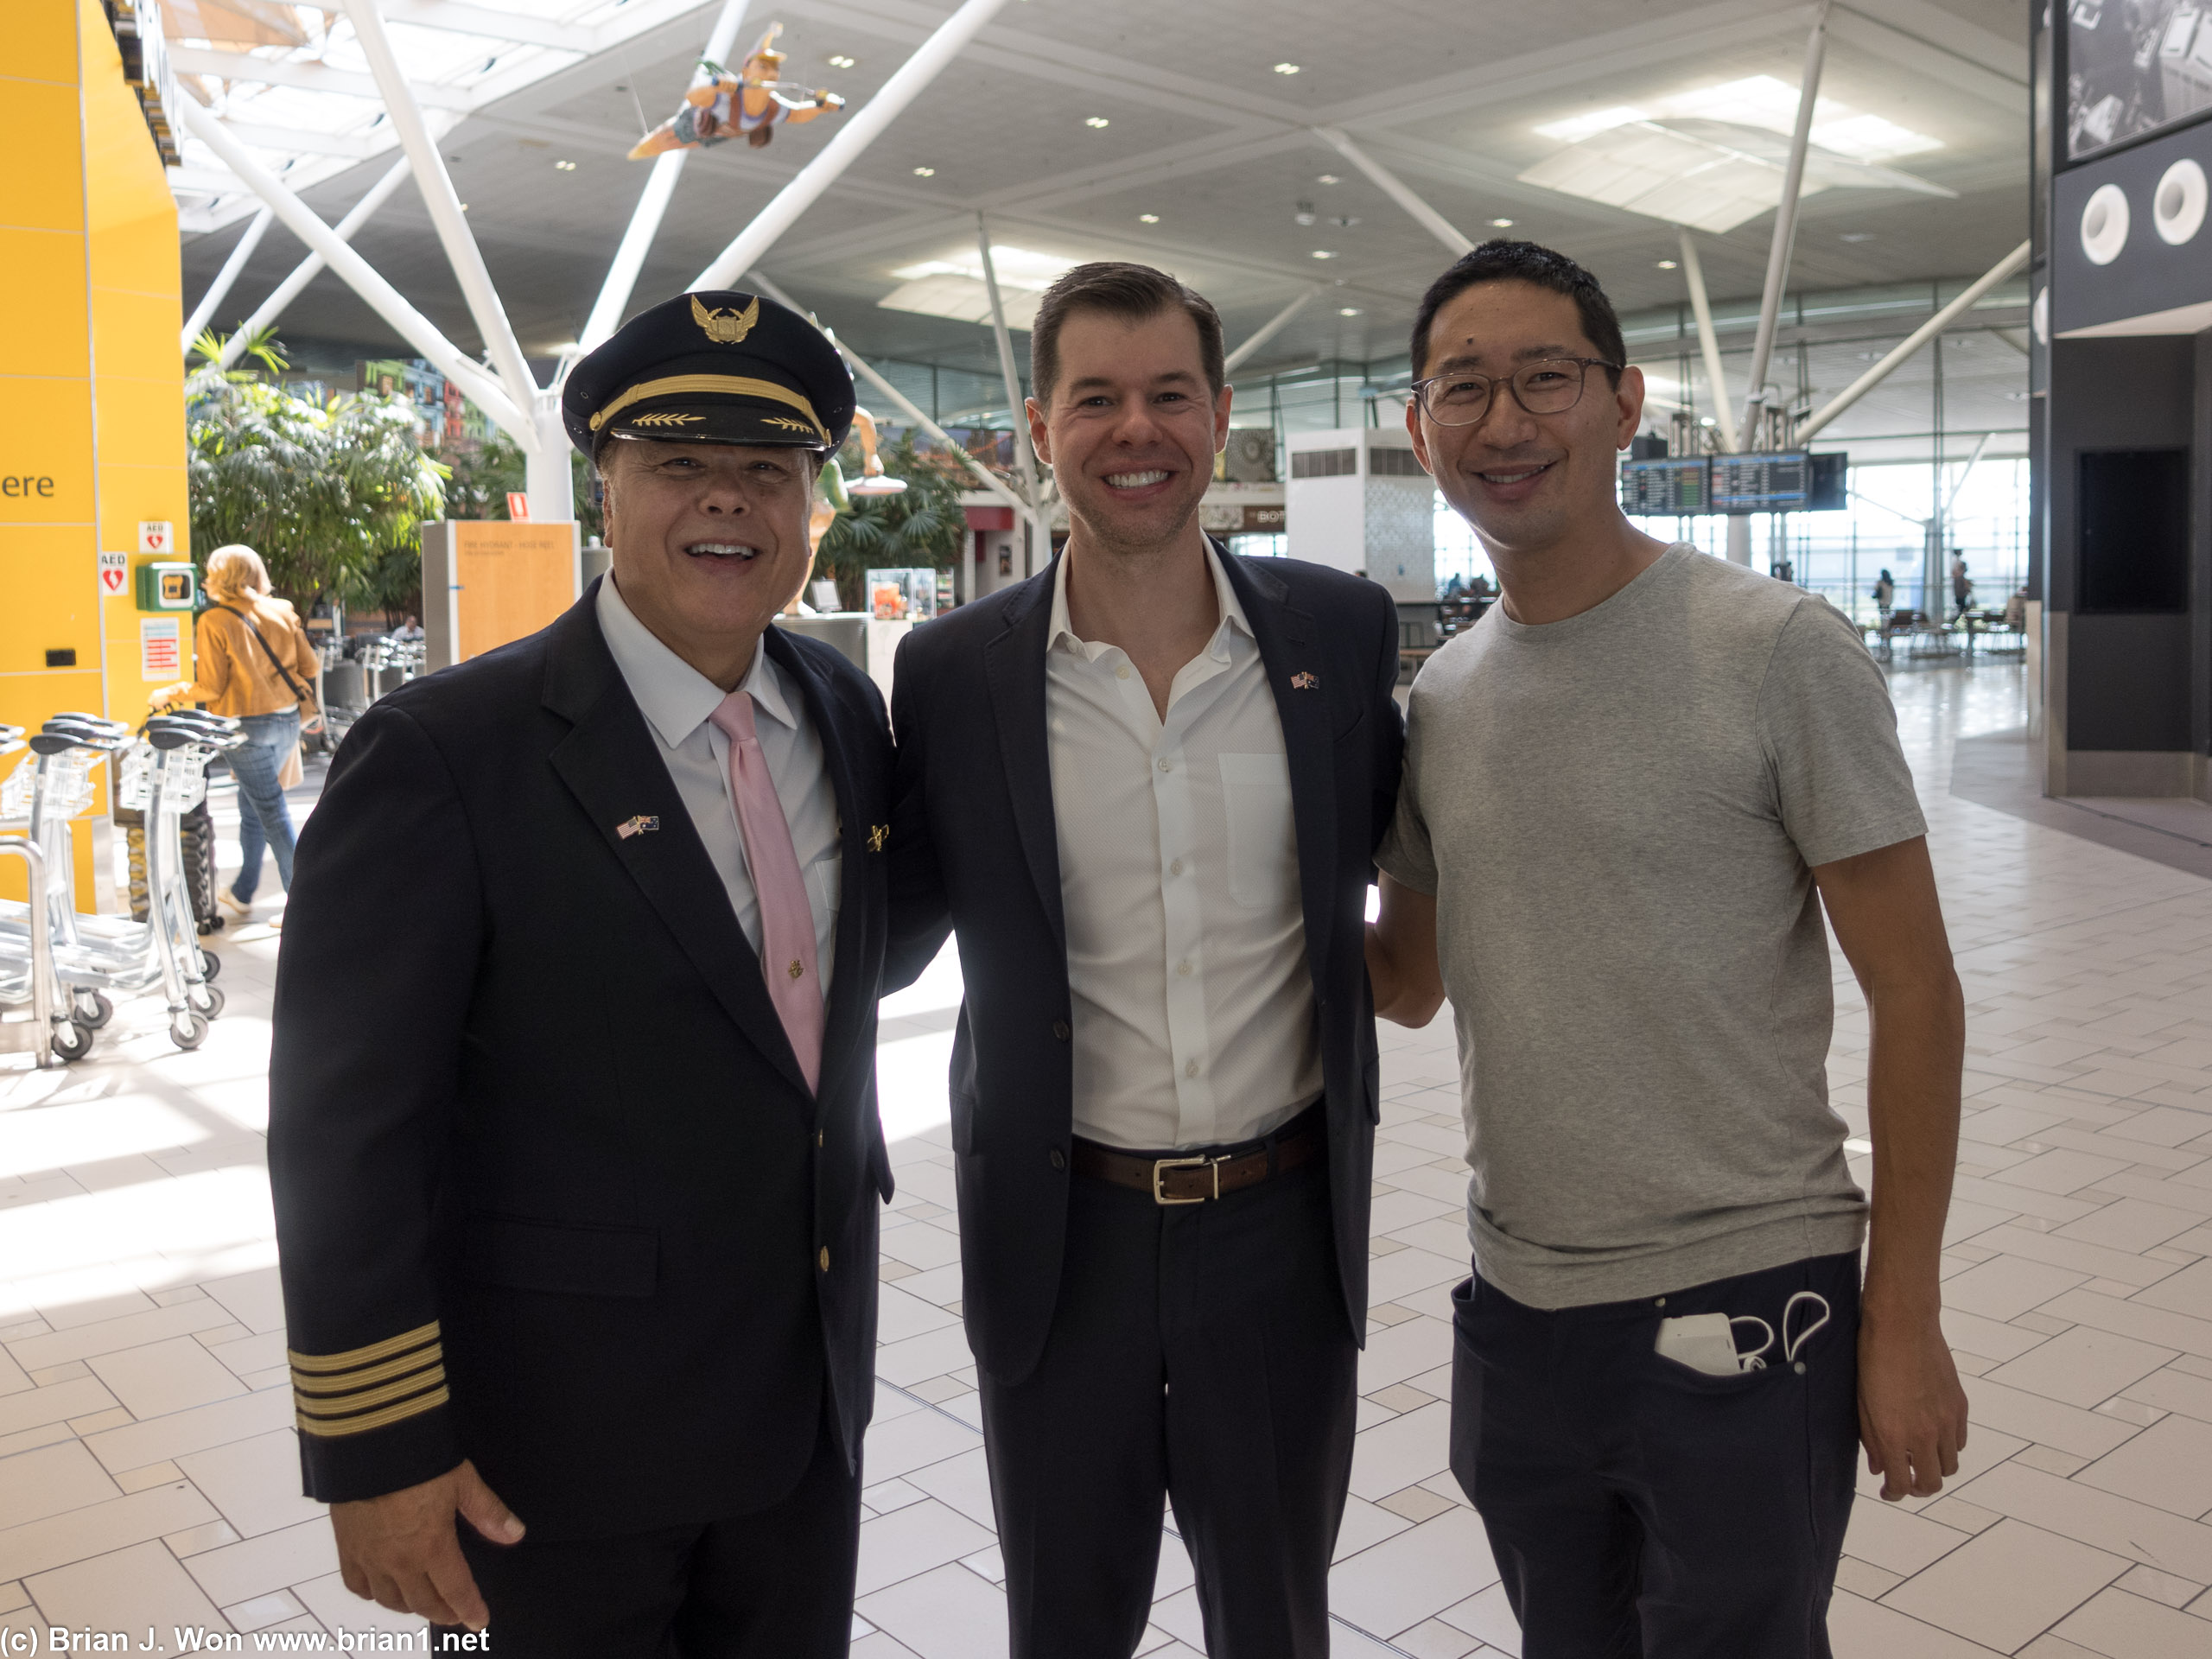 Finally got a picture with United SVP Patrick Quayle and Captain Horanyi.